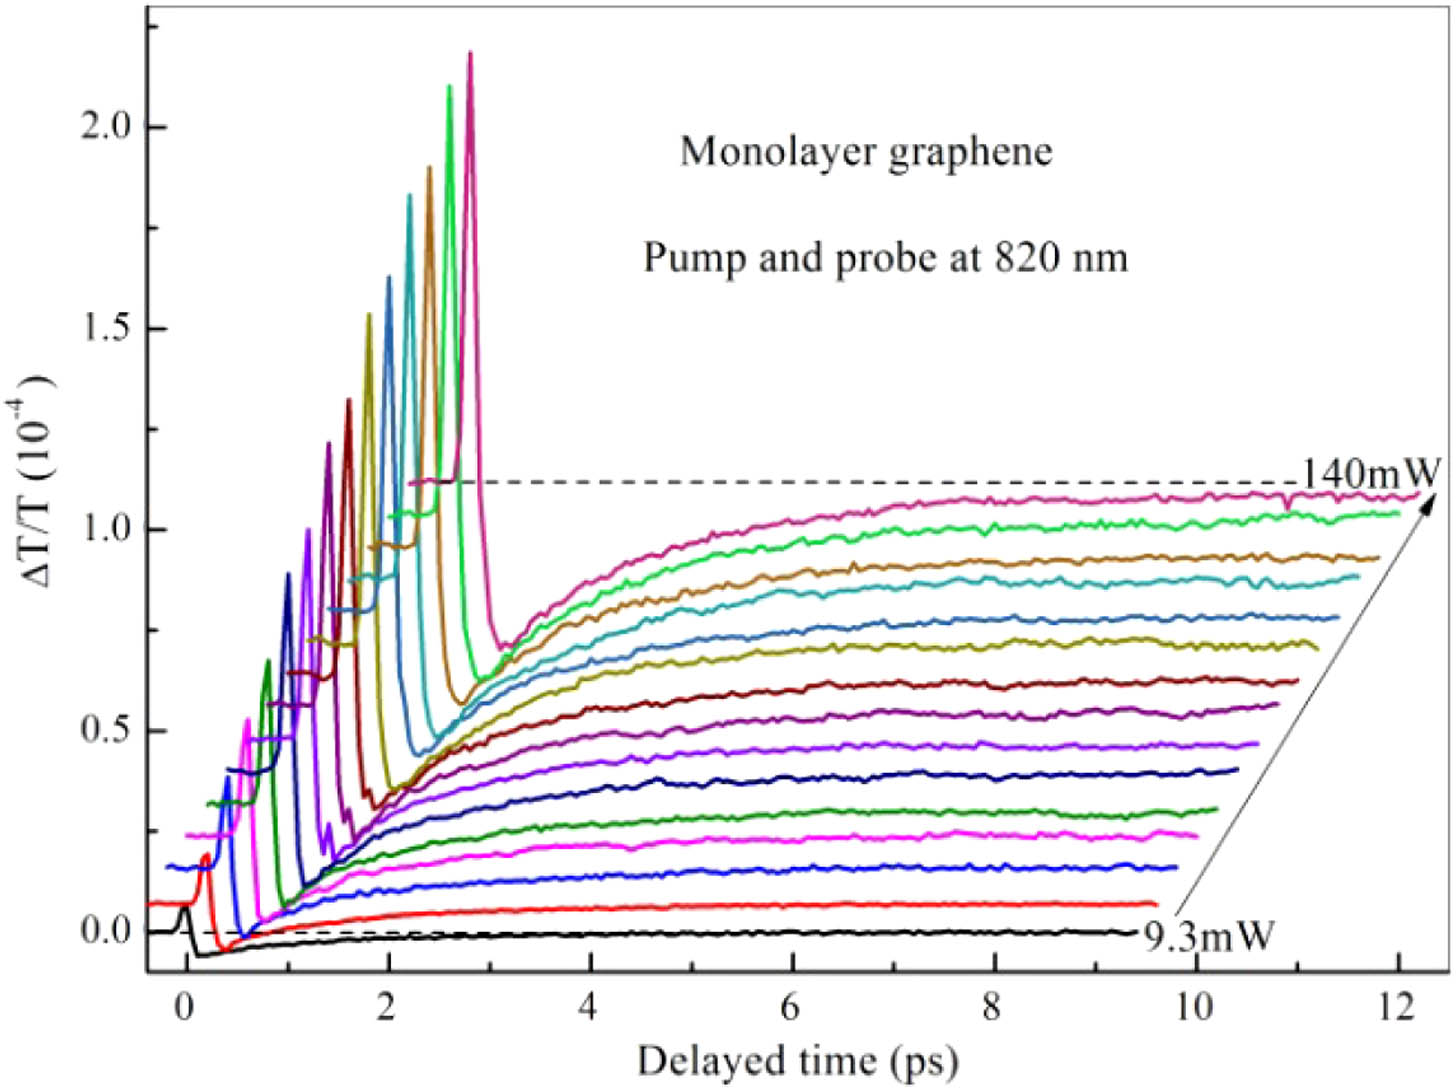 Pump power dependence of ultrafast differential transmission dynamics (DTD) of pristine monolayer CVD-grown graphene. The arrow points to the pump power increase.